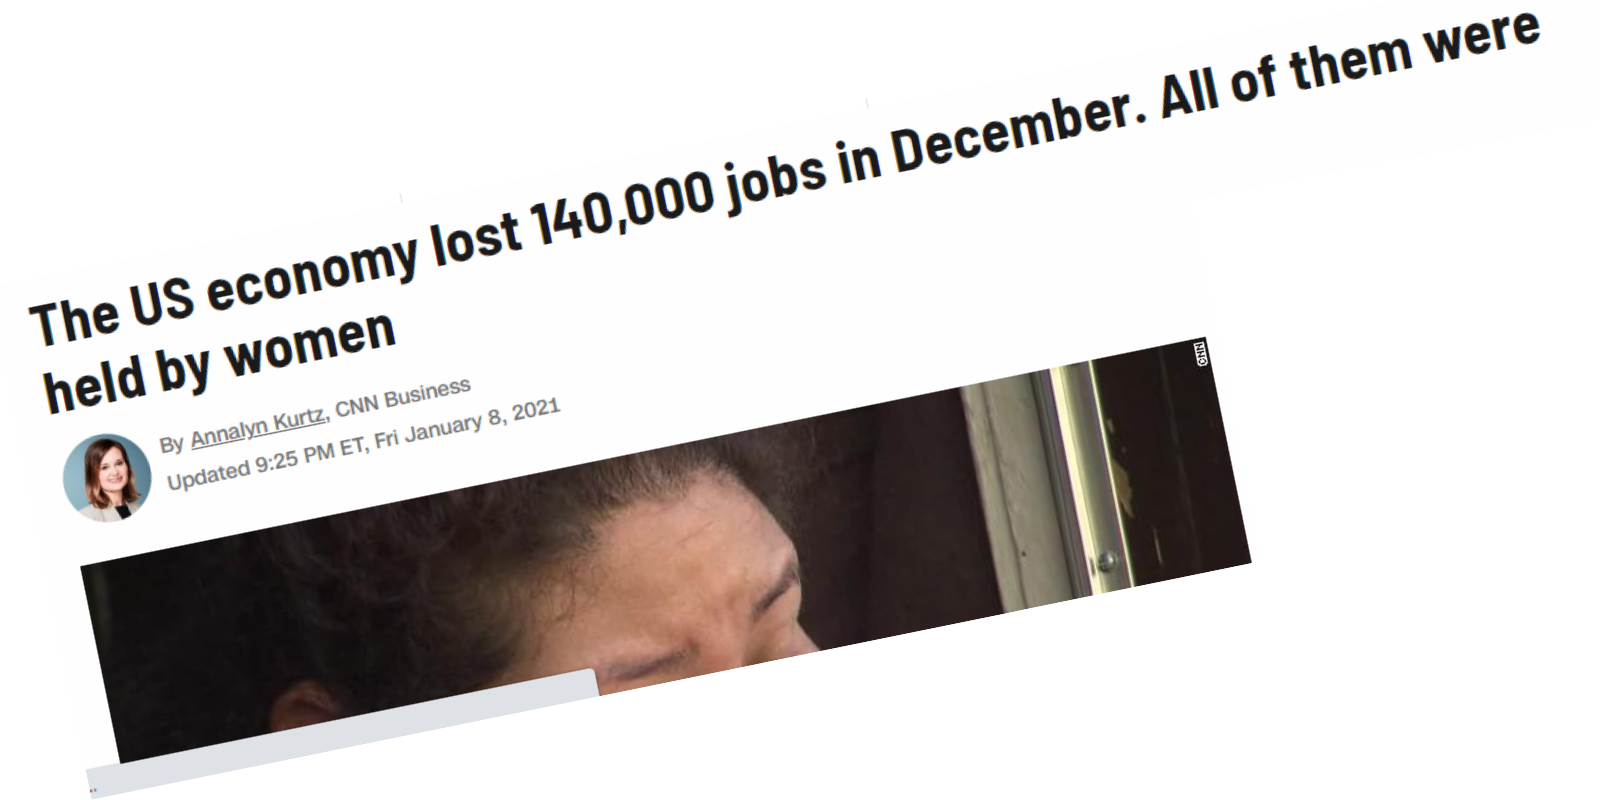 Headlines and Data: Employment is in crisis for Black and Latina women across the USA - News title on job loss